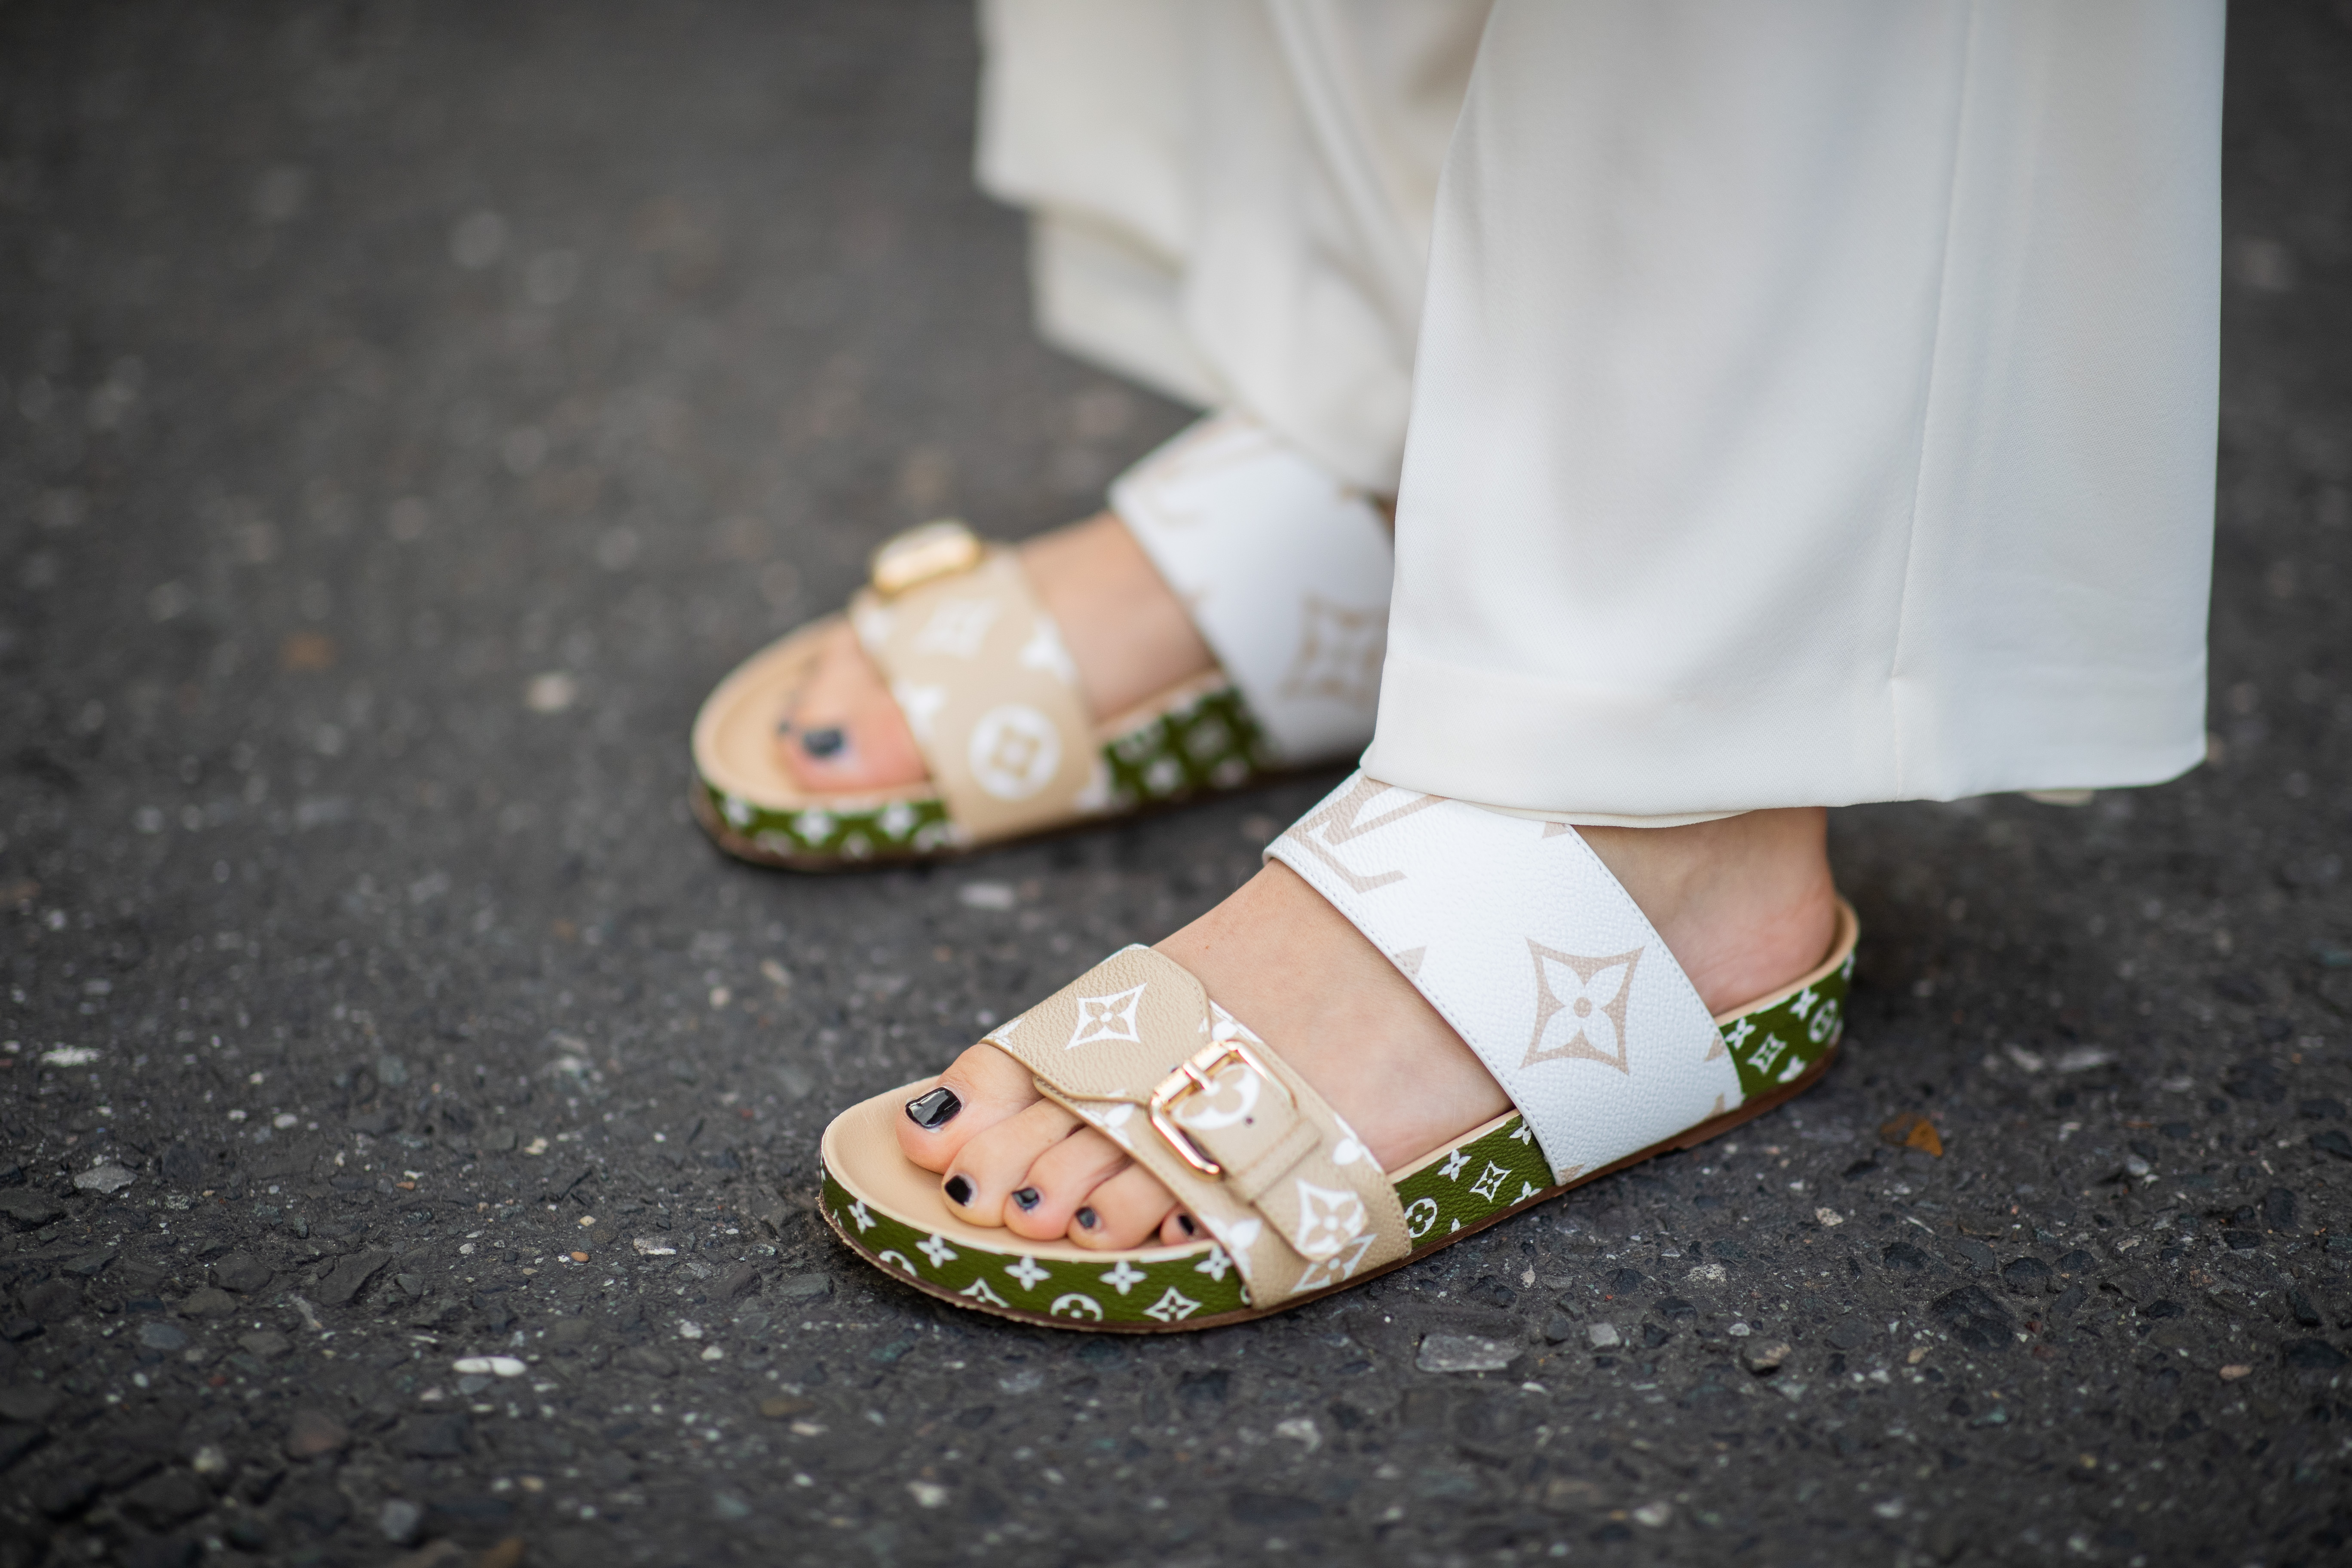 4 Comfy Flat Sandals for Summer Our Editors Love Right Now